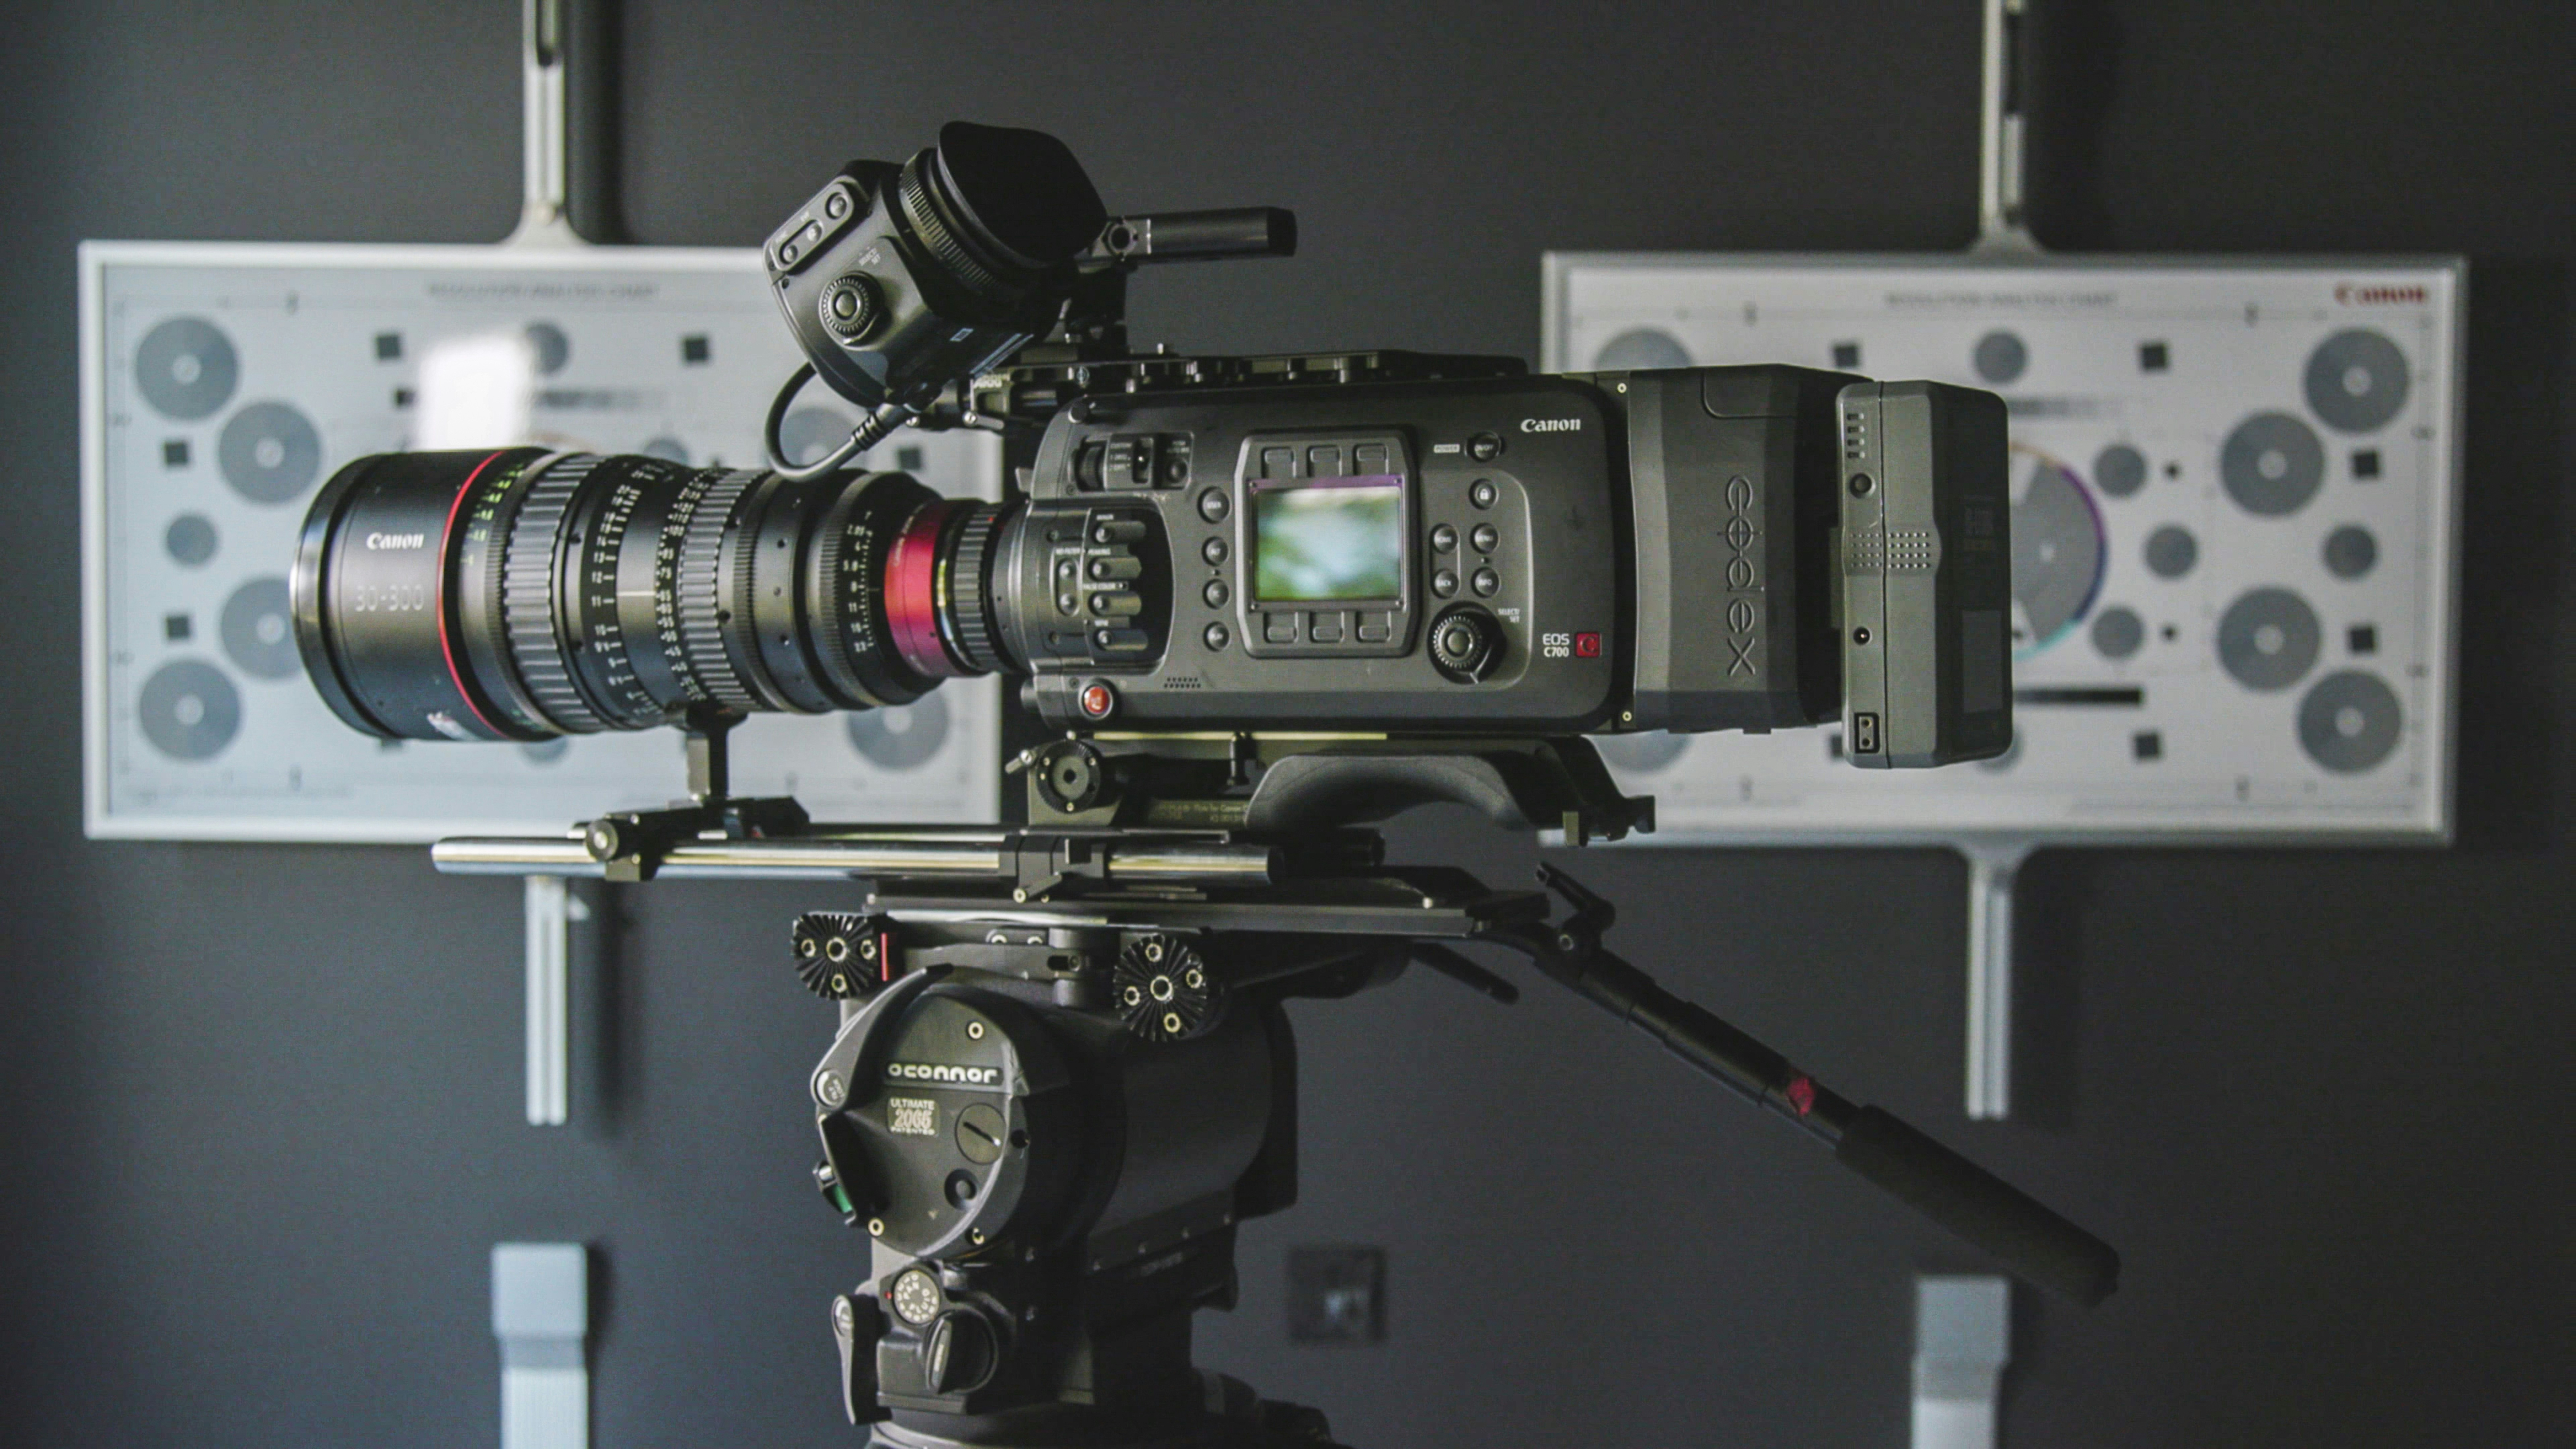 Gear provided by Canon and Atlas Lens Co. Image captured by ShareGrid co-founder, Brent Barbano.